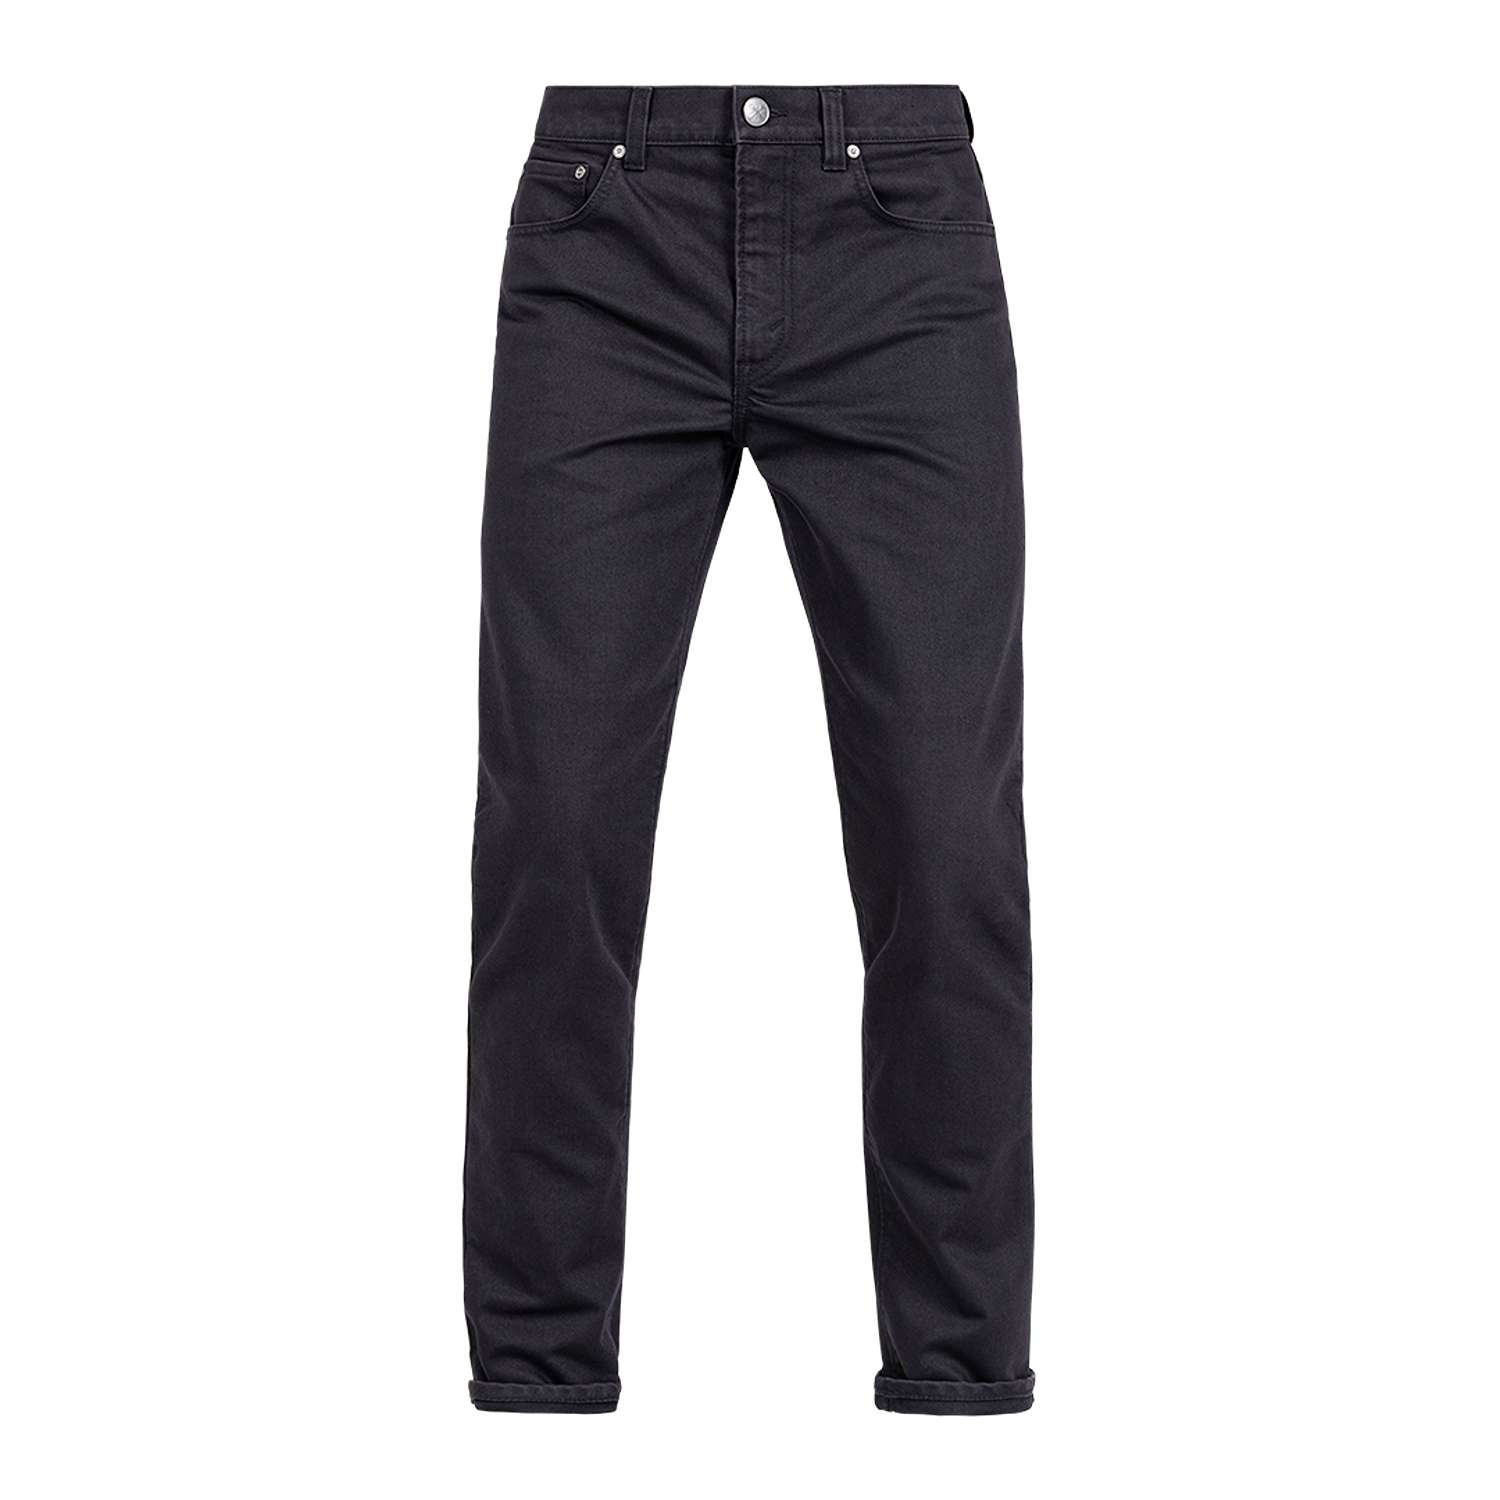 Image of John Doe Classic Tapered Jeans Black Black Taille W32/L32